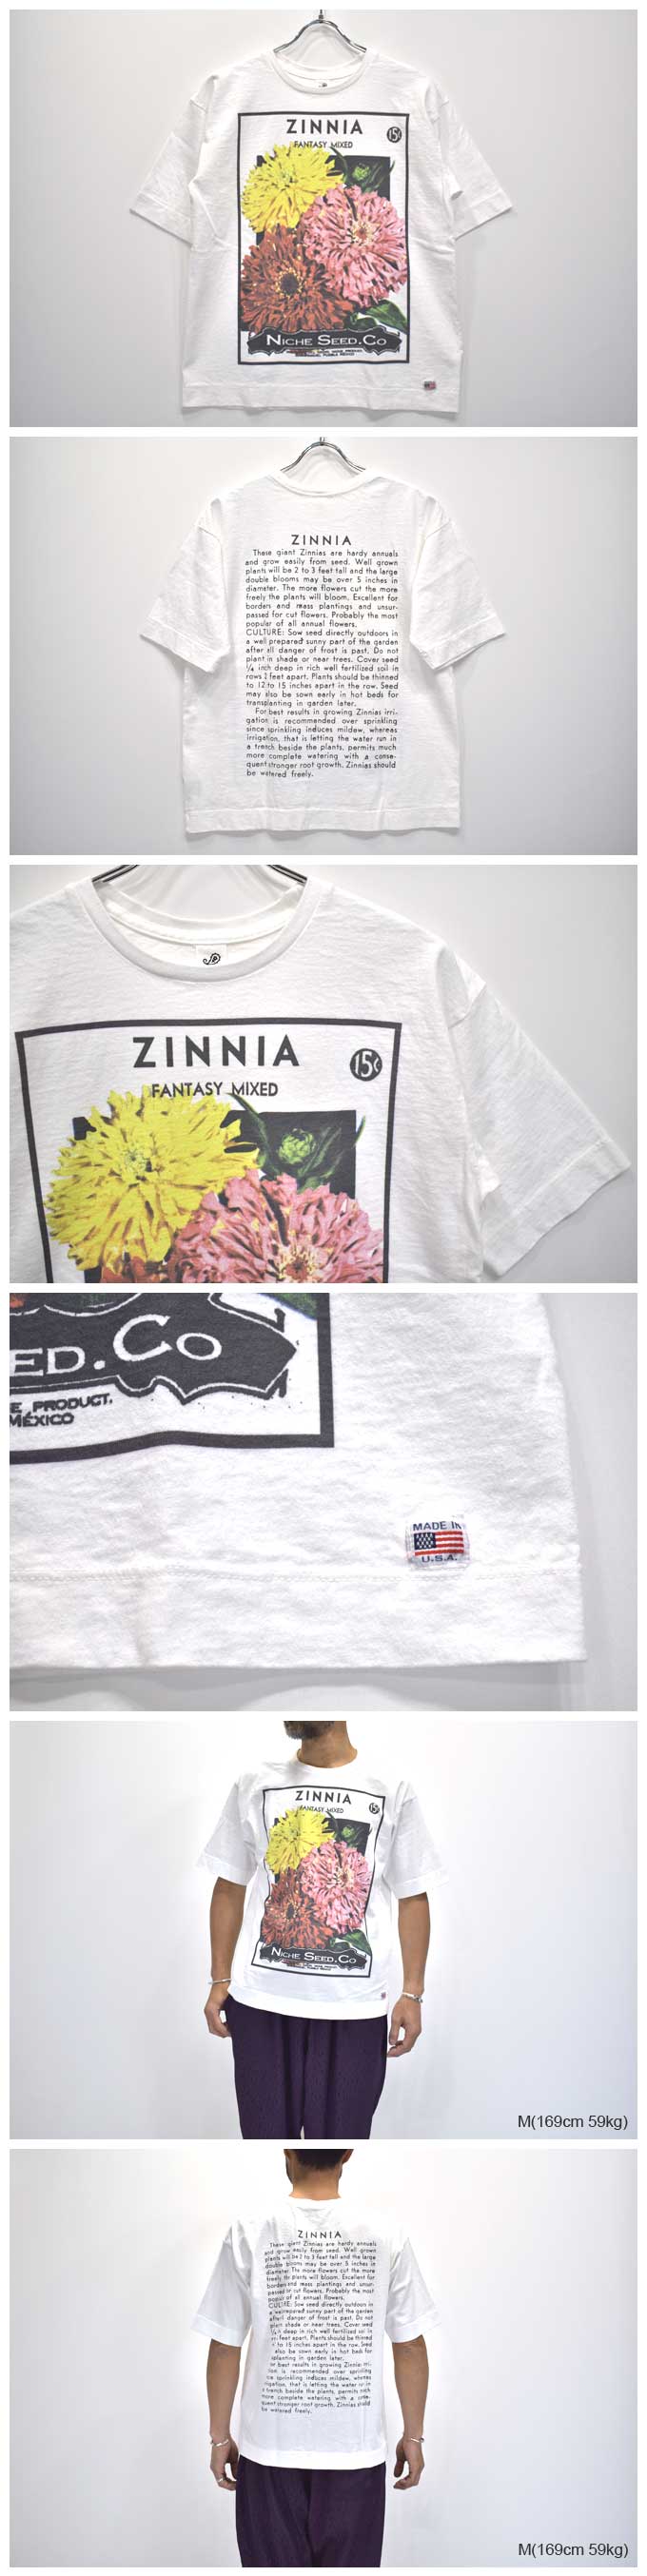 Niche (THIS TIME inc.) Flower Seeds T-Shirts(Zinnia)  